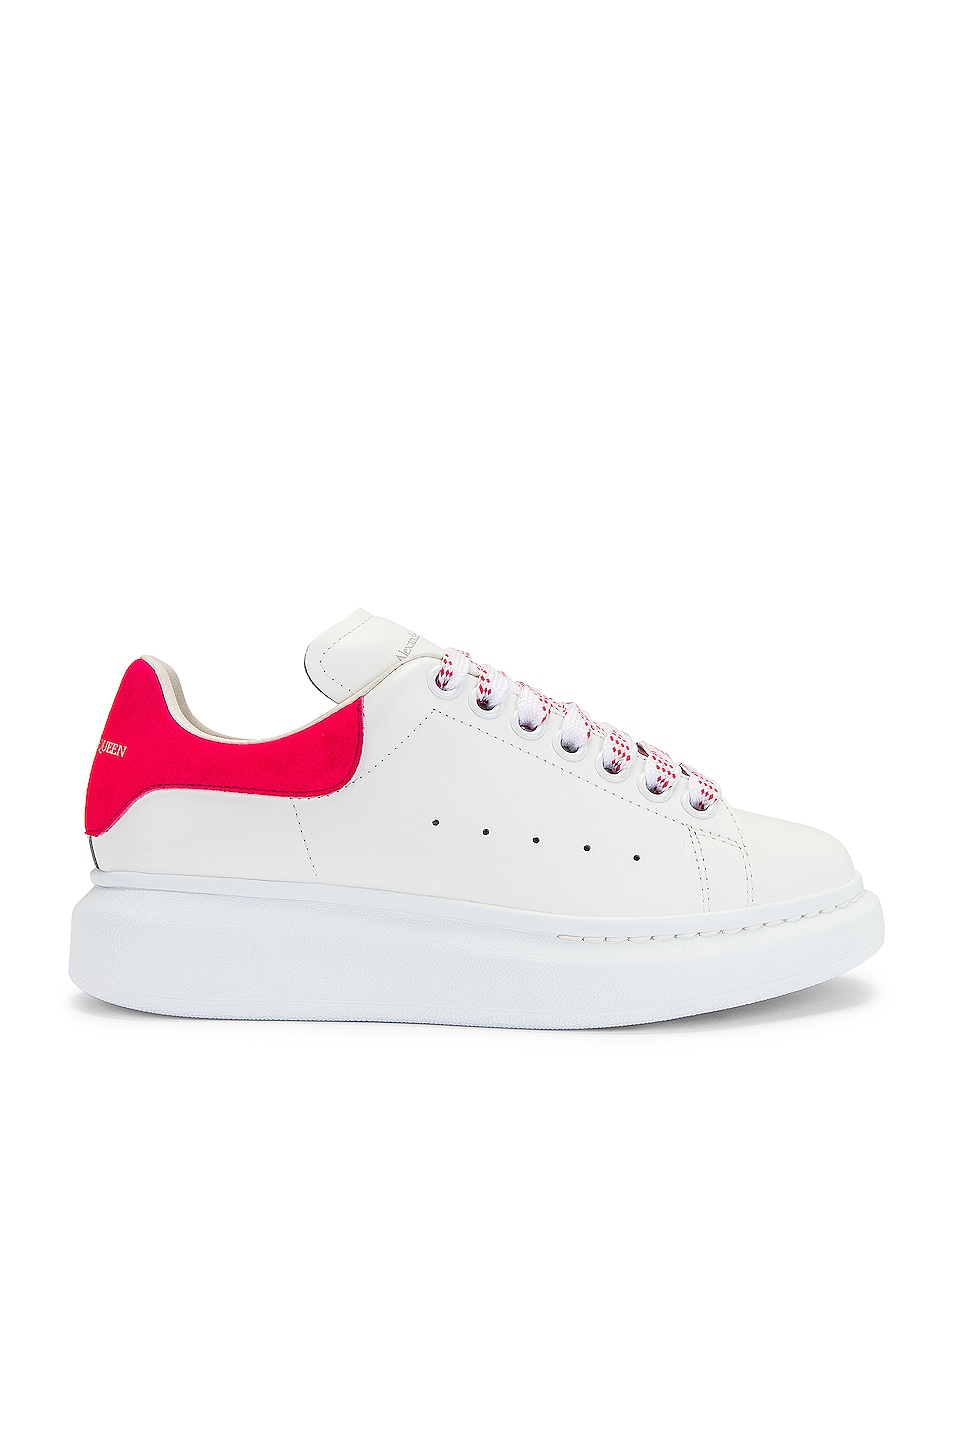 Image 1 of Alexander McQueen Leather Sneakers in White & Peony Pink